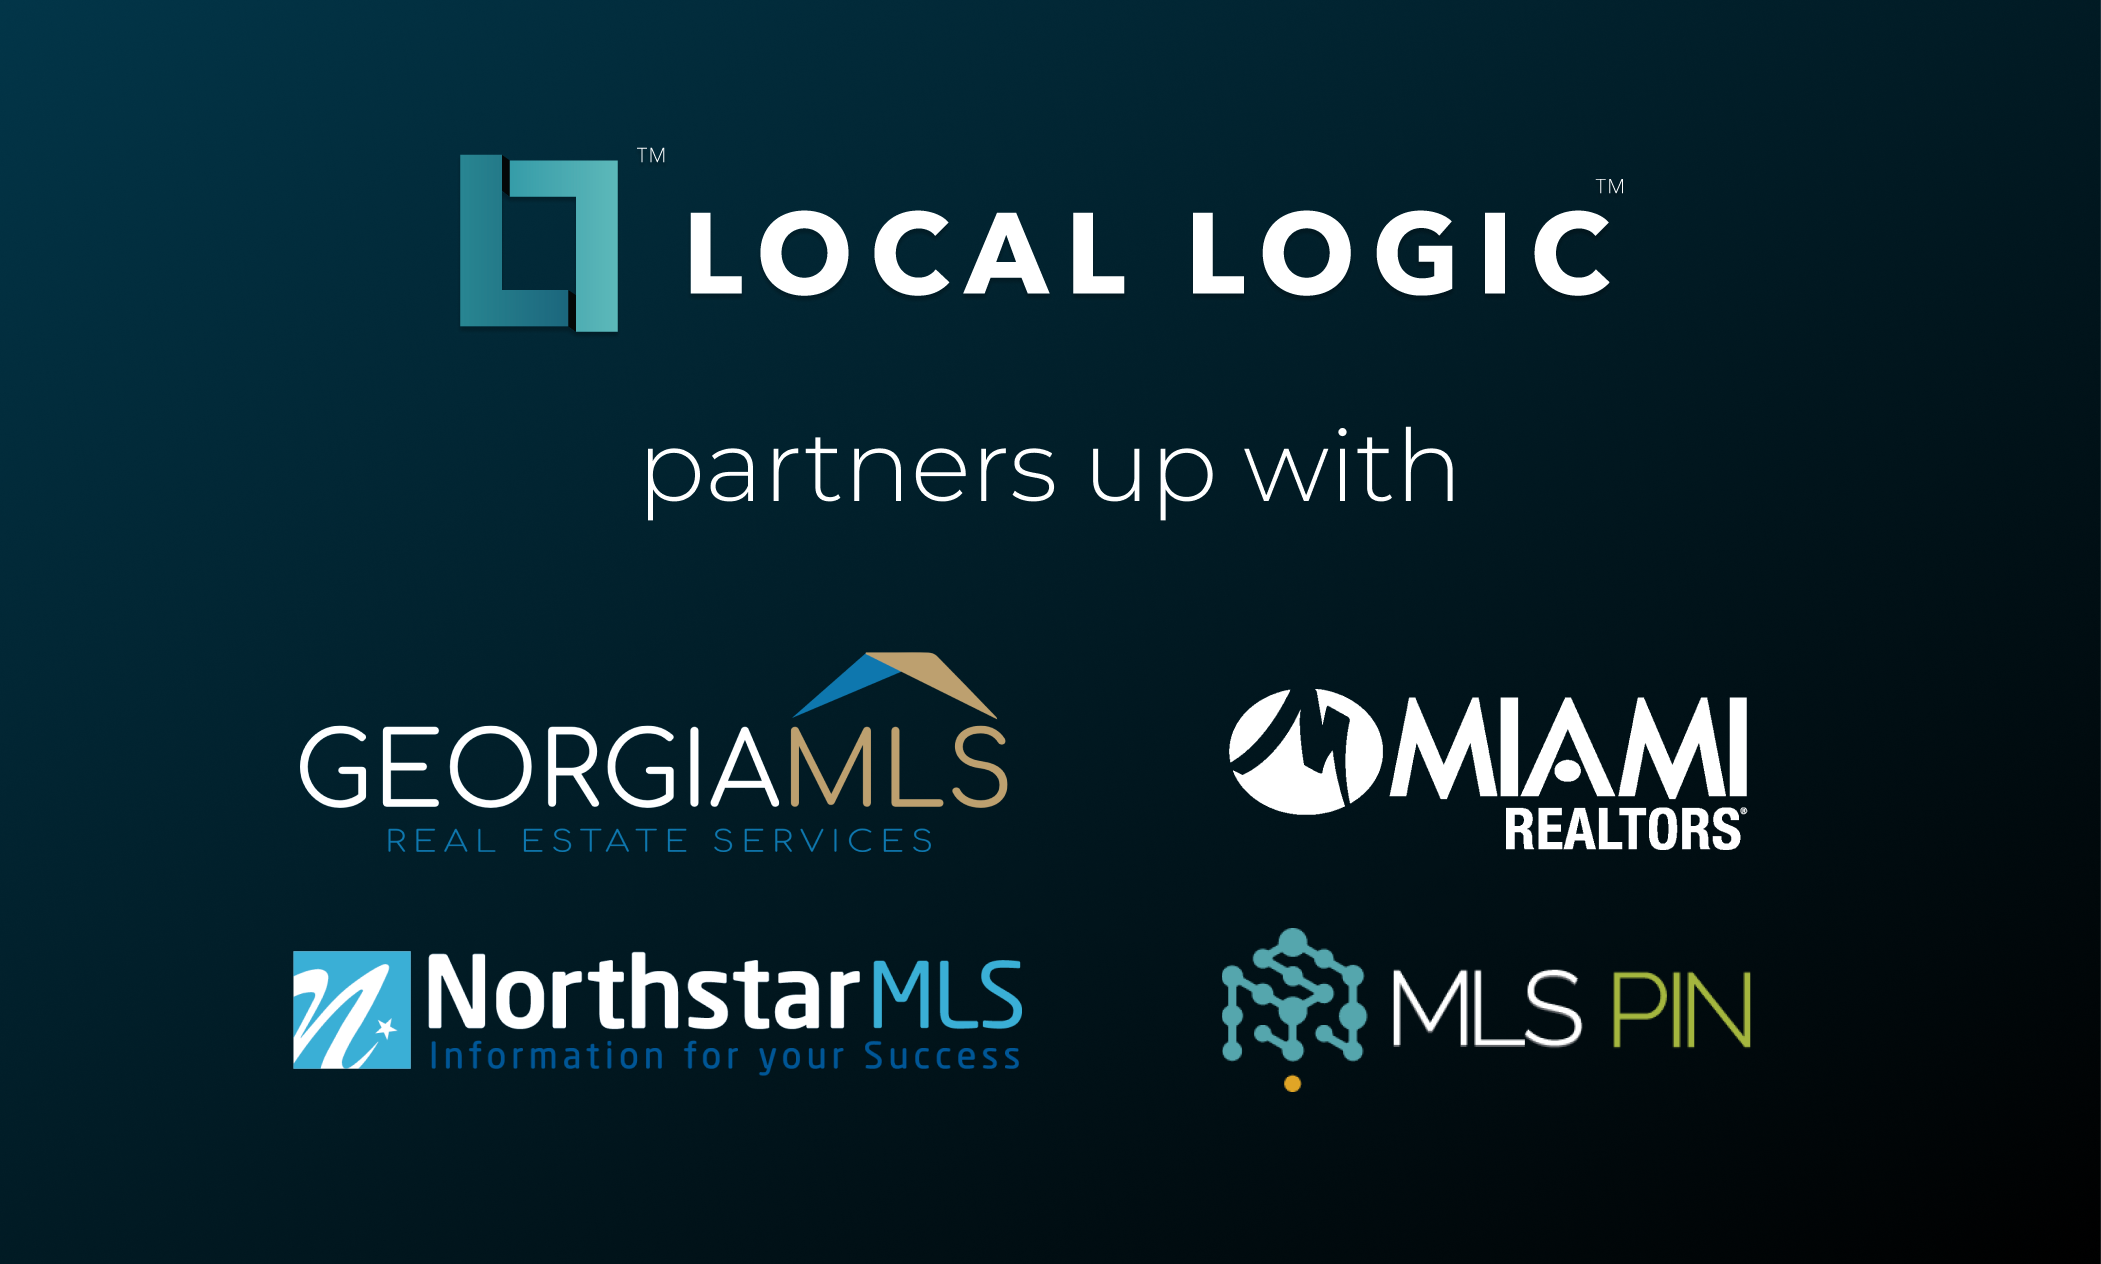 Logo of Local Logic on top of text "parnters up with" followed by GeorgiaMLS logo, Miami Realtors logo, NorthstarMLS logo, and MLS PIN logo to announce partnerships with multiple MLSs